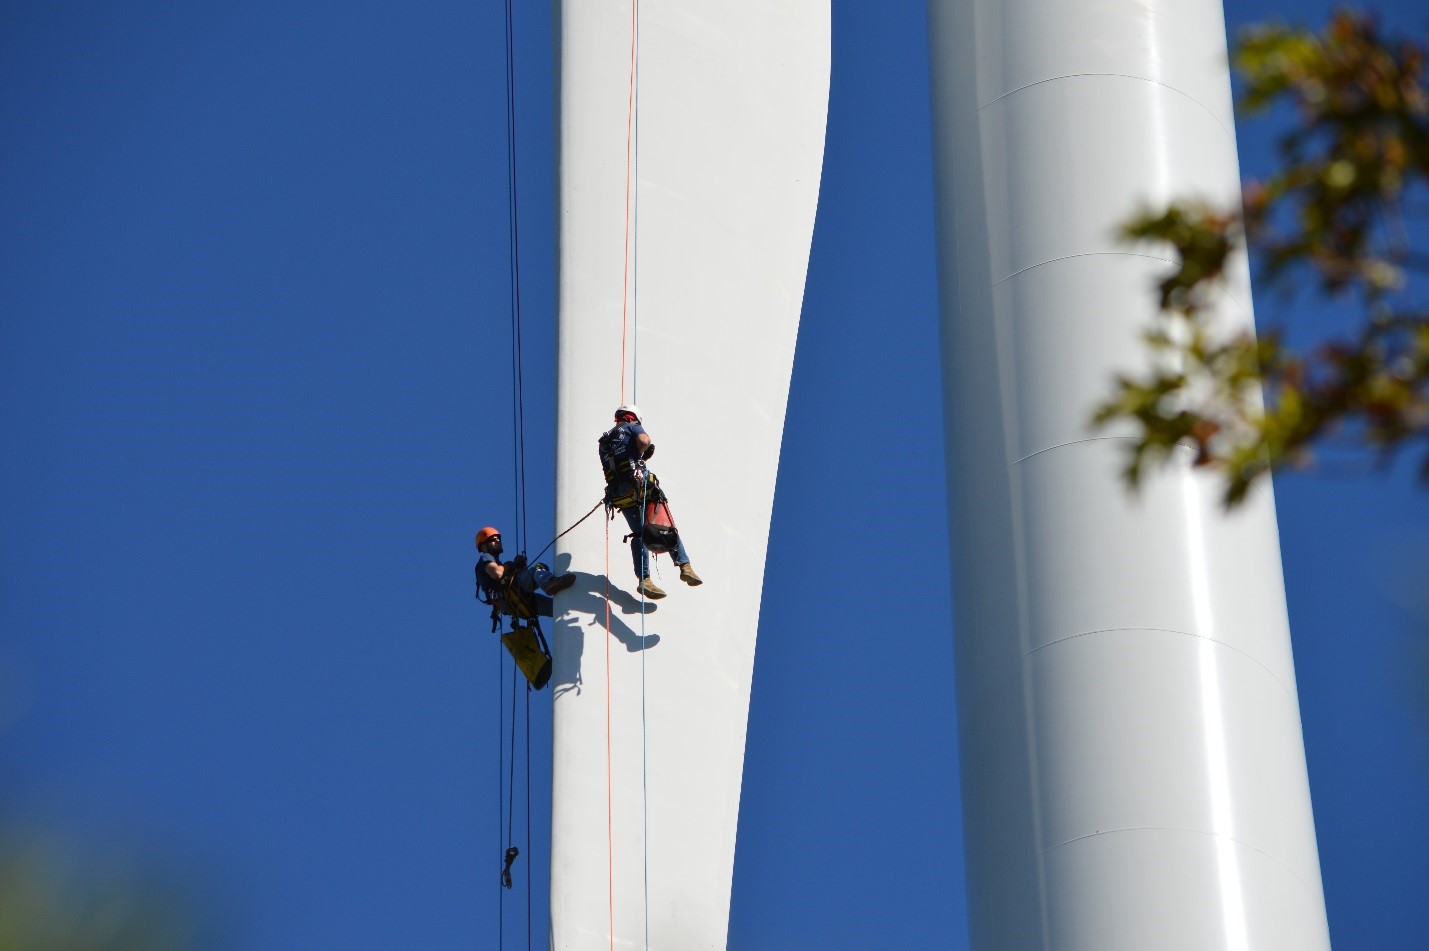 Air Force personnel inspecting the wind turbine blades